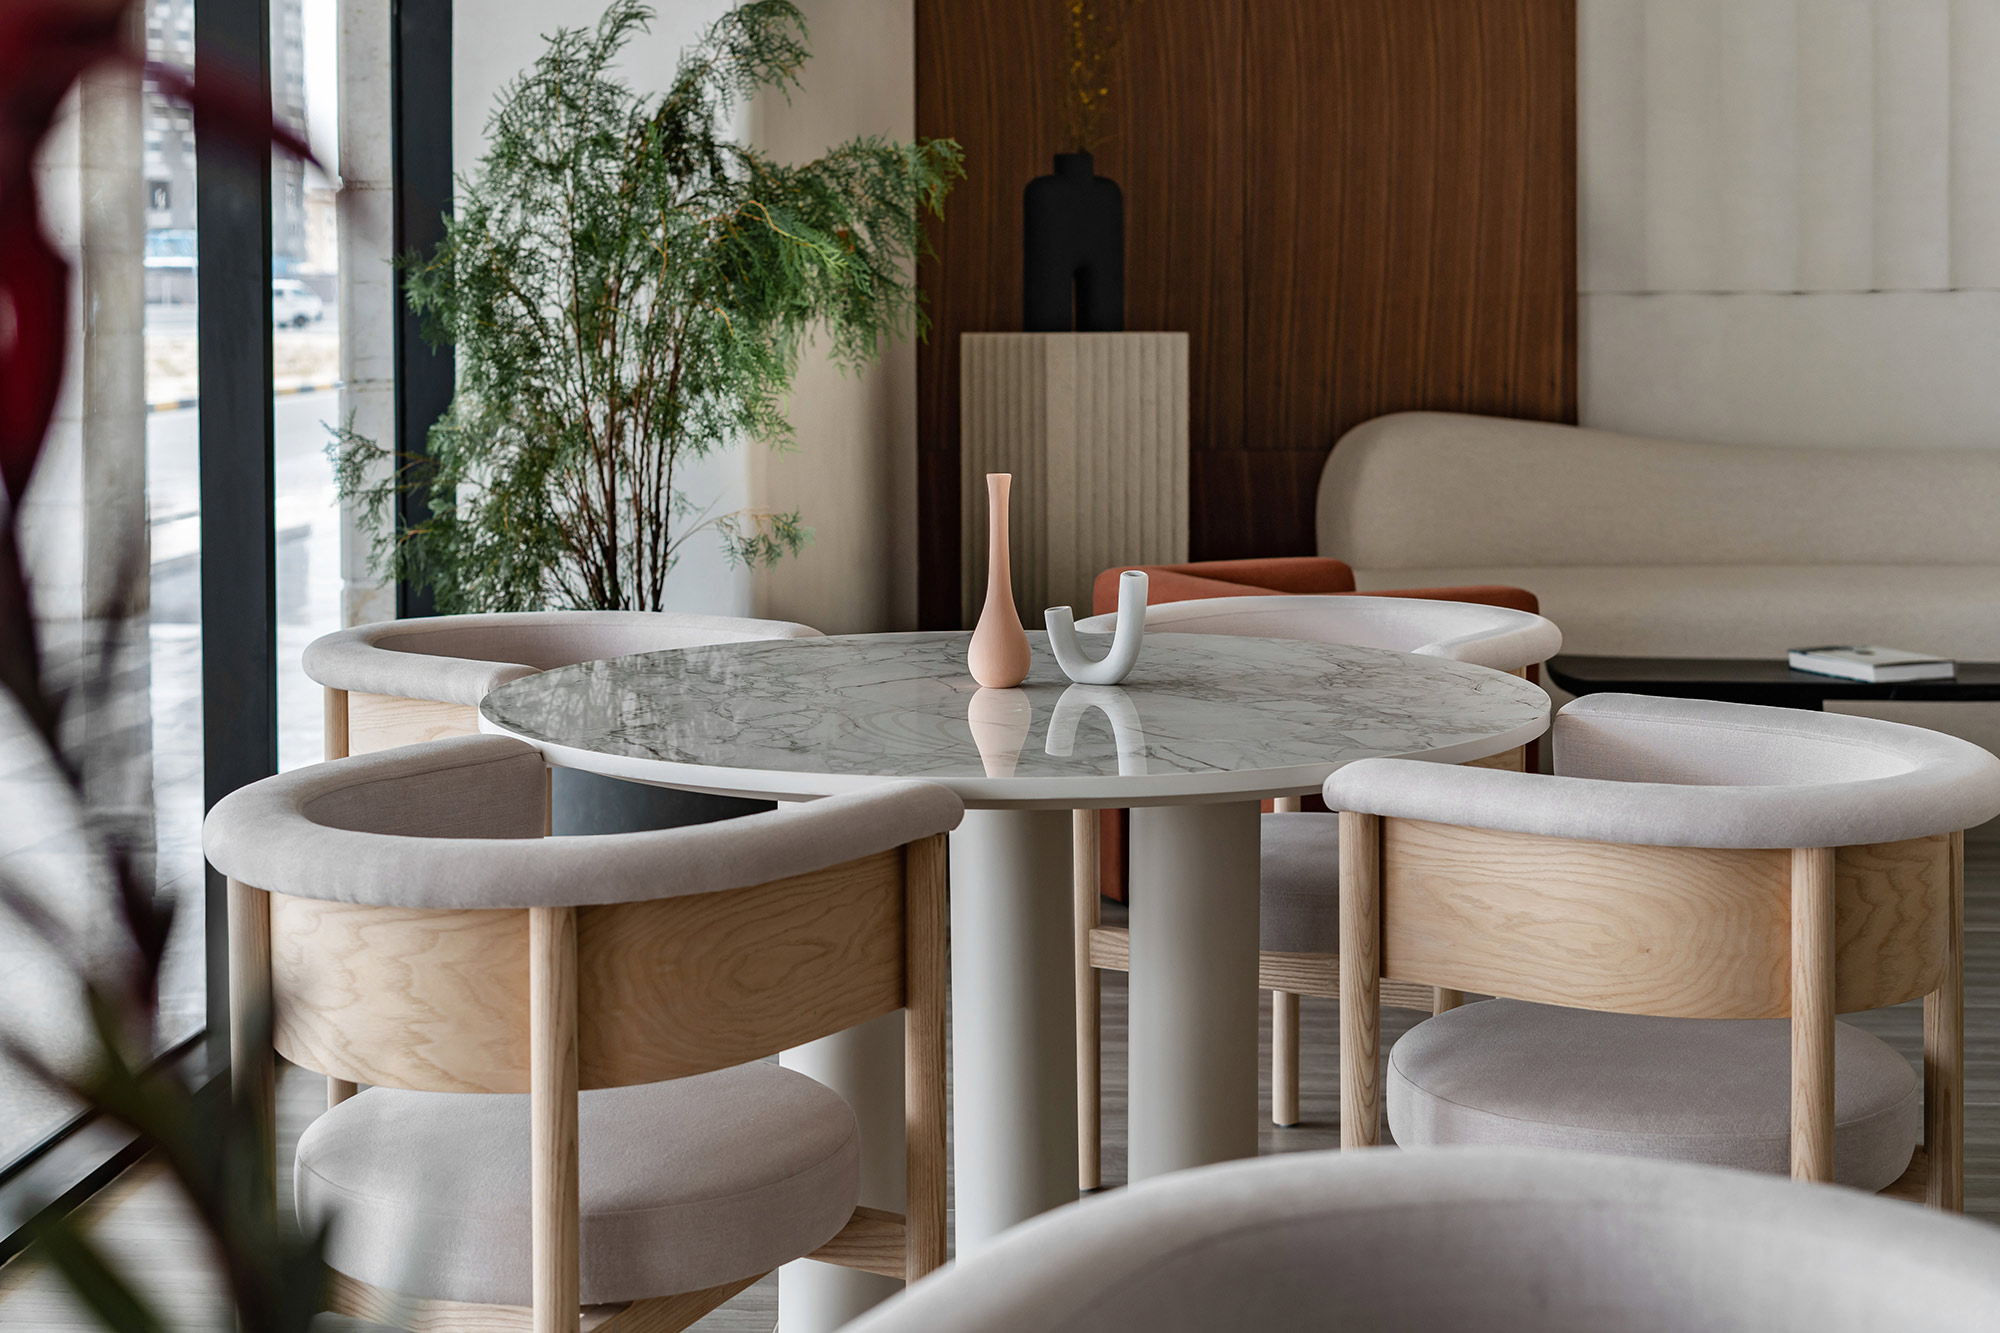 Image of The House by Cest ici Design 1 in Burnside, Tokyo’s trendy restaurant that turns dining into an immersive culinary experience - Cosentino